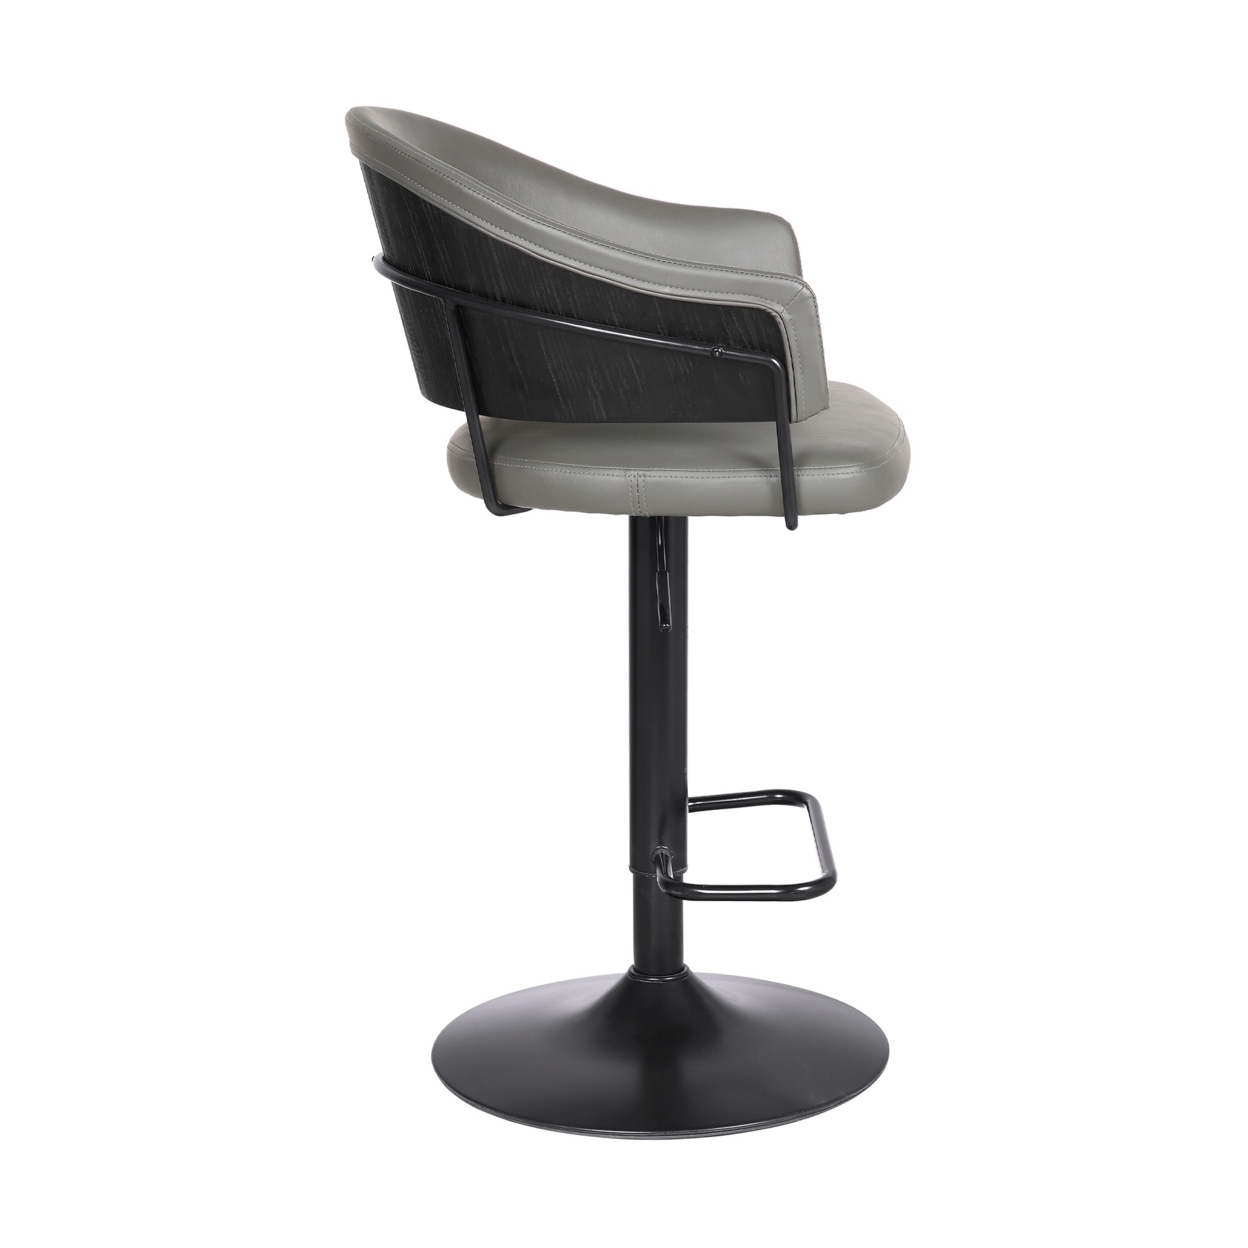 Adjustable Leatherette Swivel Barstool With Curved Seat, Gray And Black- Saltoro Sherpi